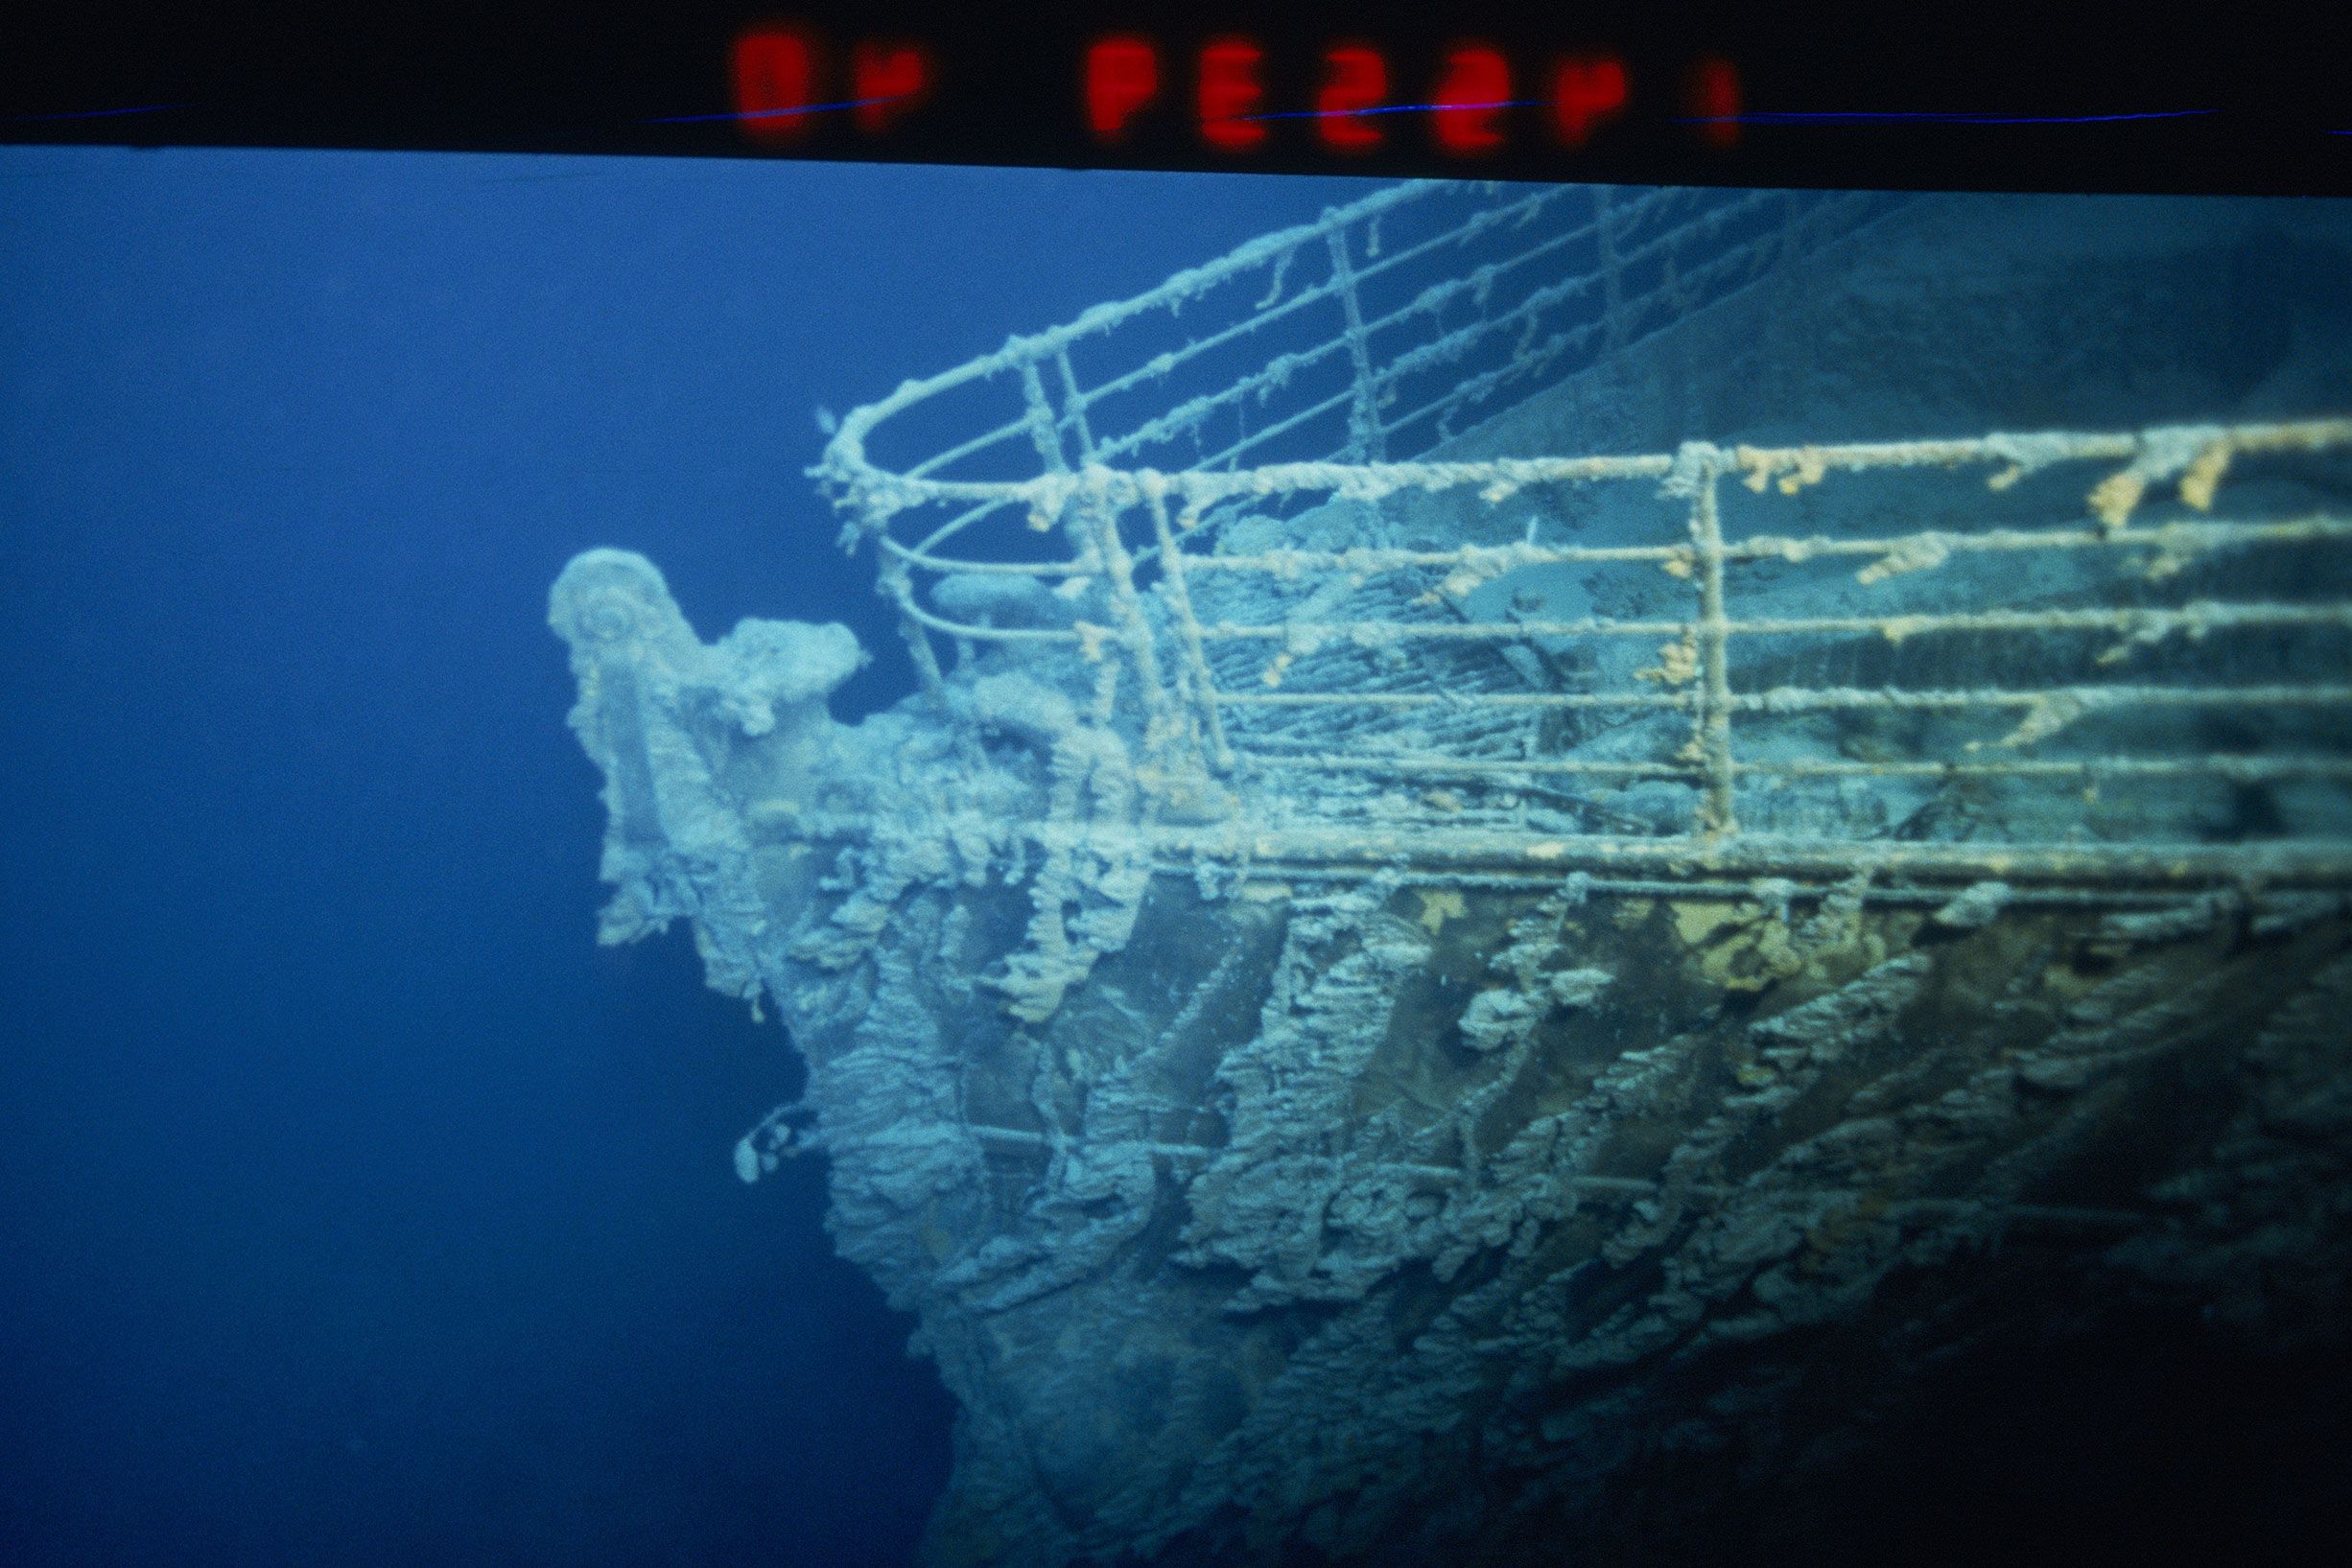 How Deep Is The Titanic Wreck In Meters